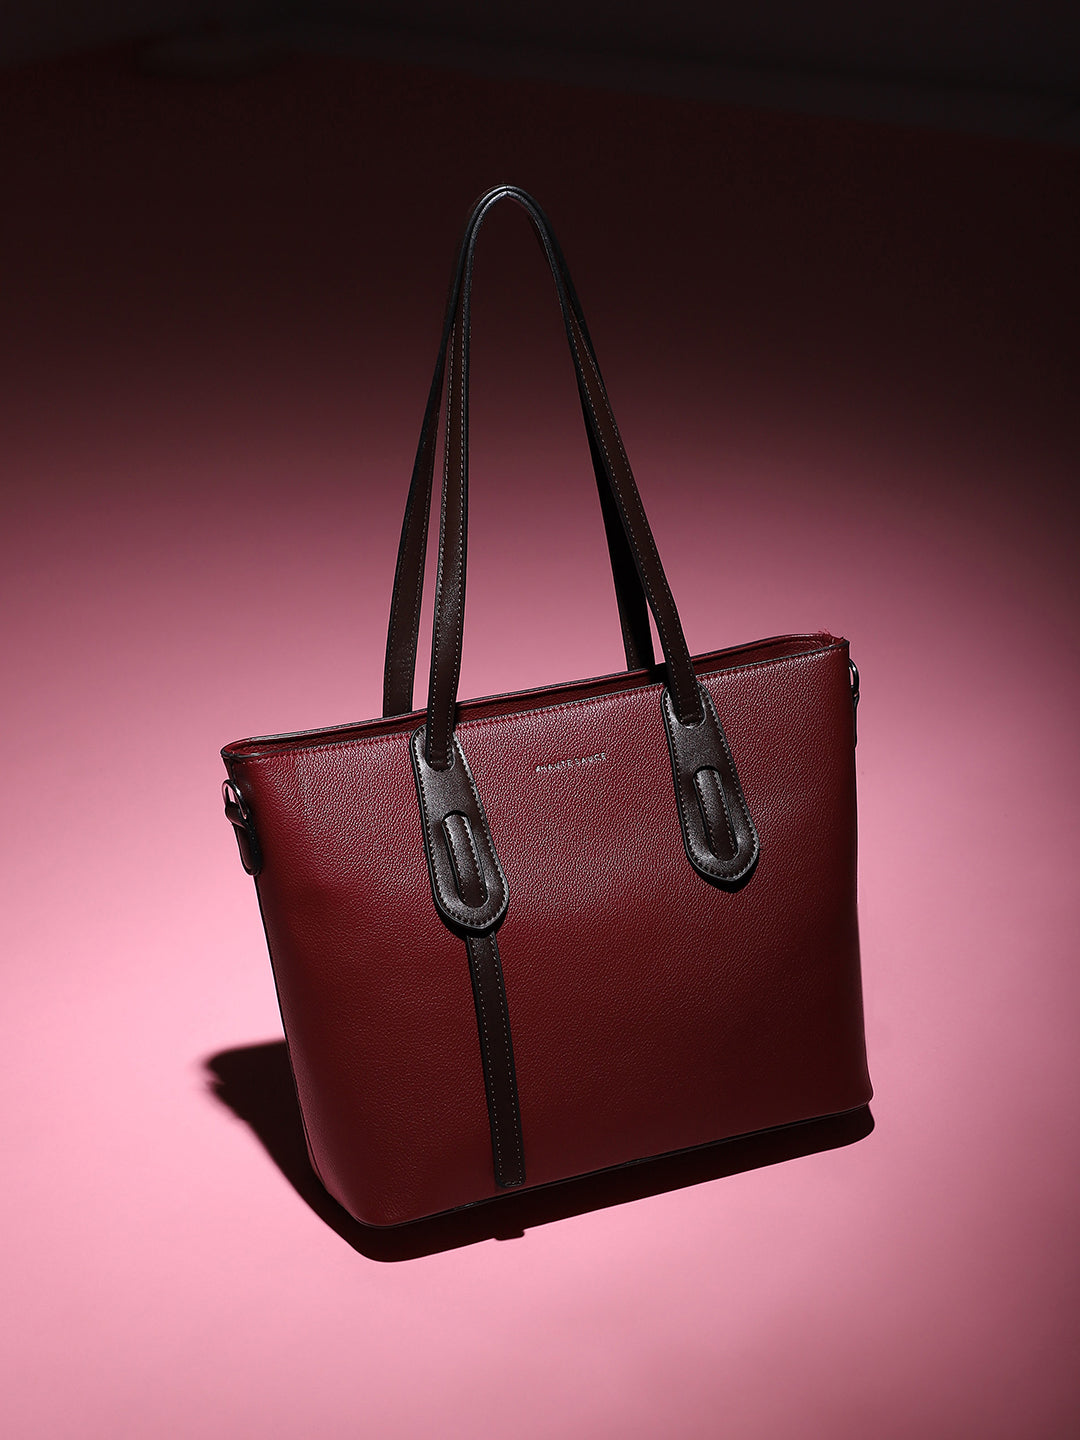 On The Go Tote Bag - Maroon